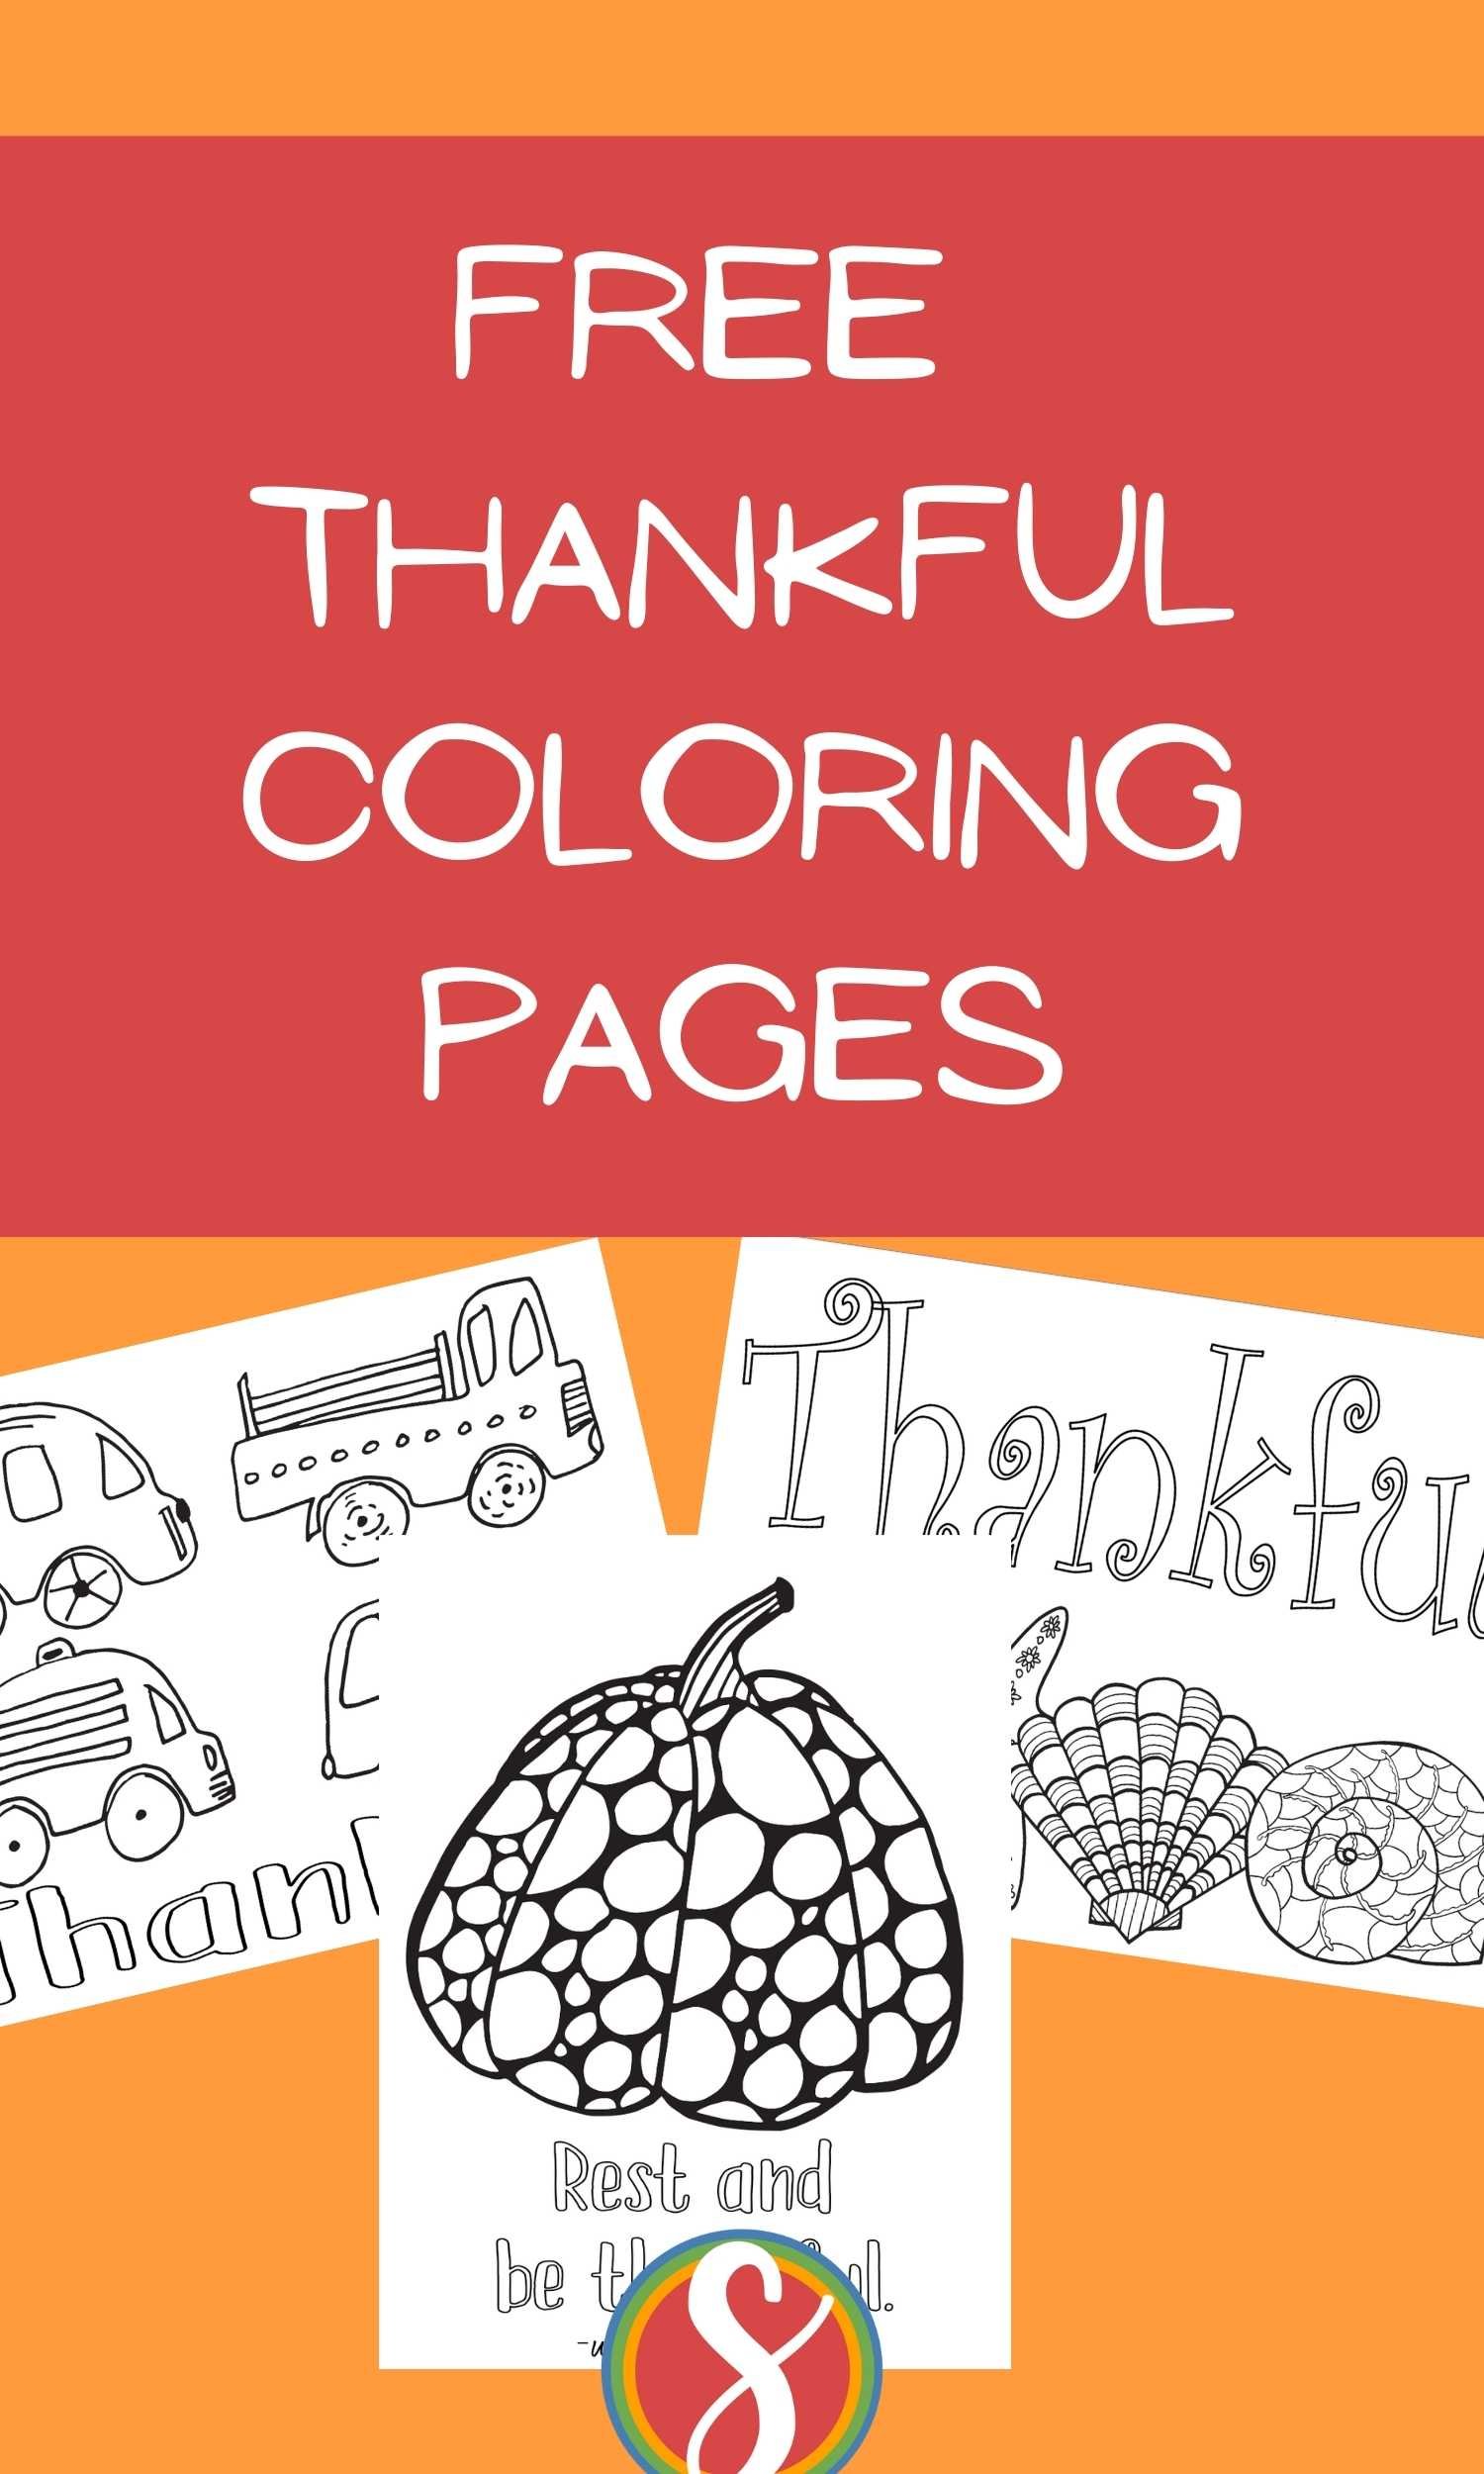 collage of thankful coloring pages with thanksgiving-themed art